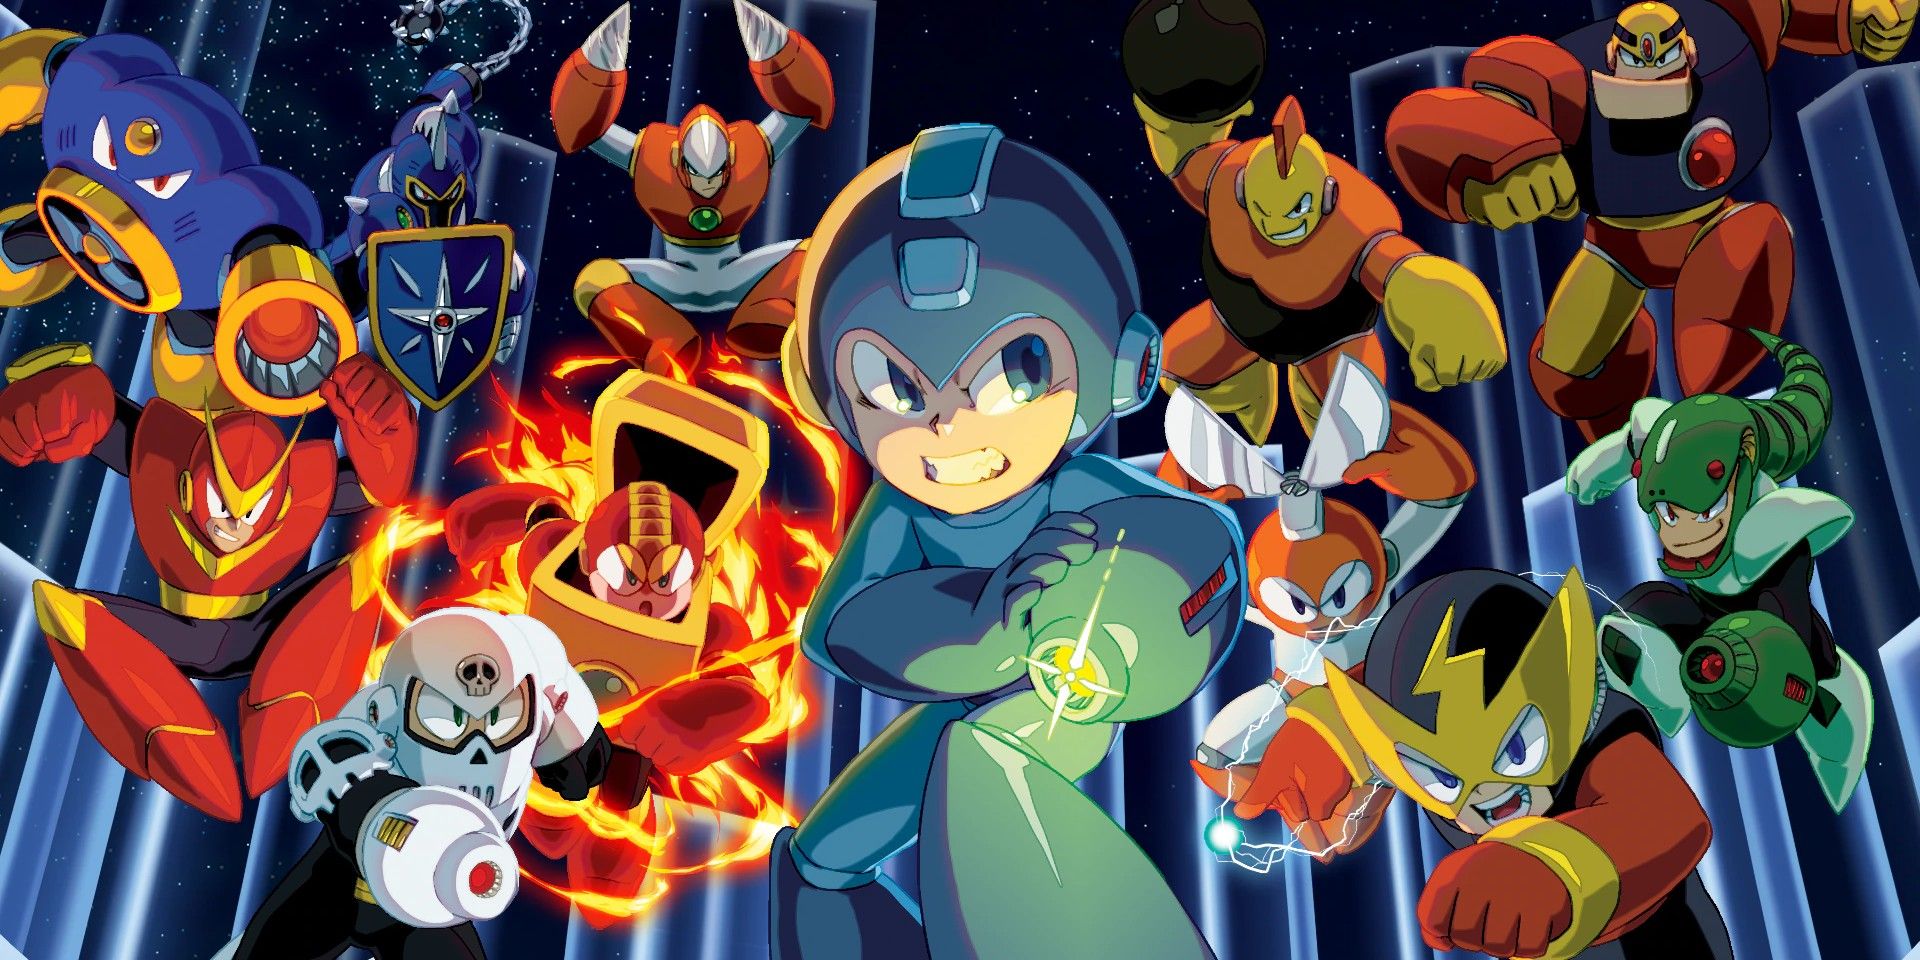 Mega Man surrounded by classic bosses